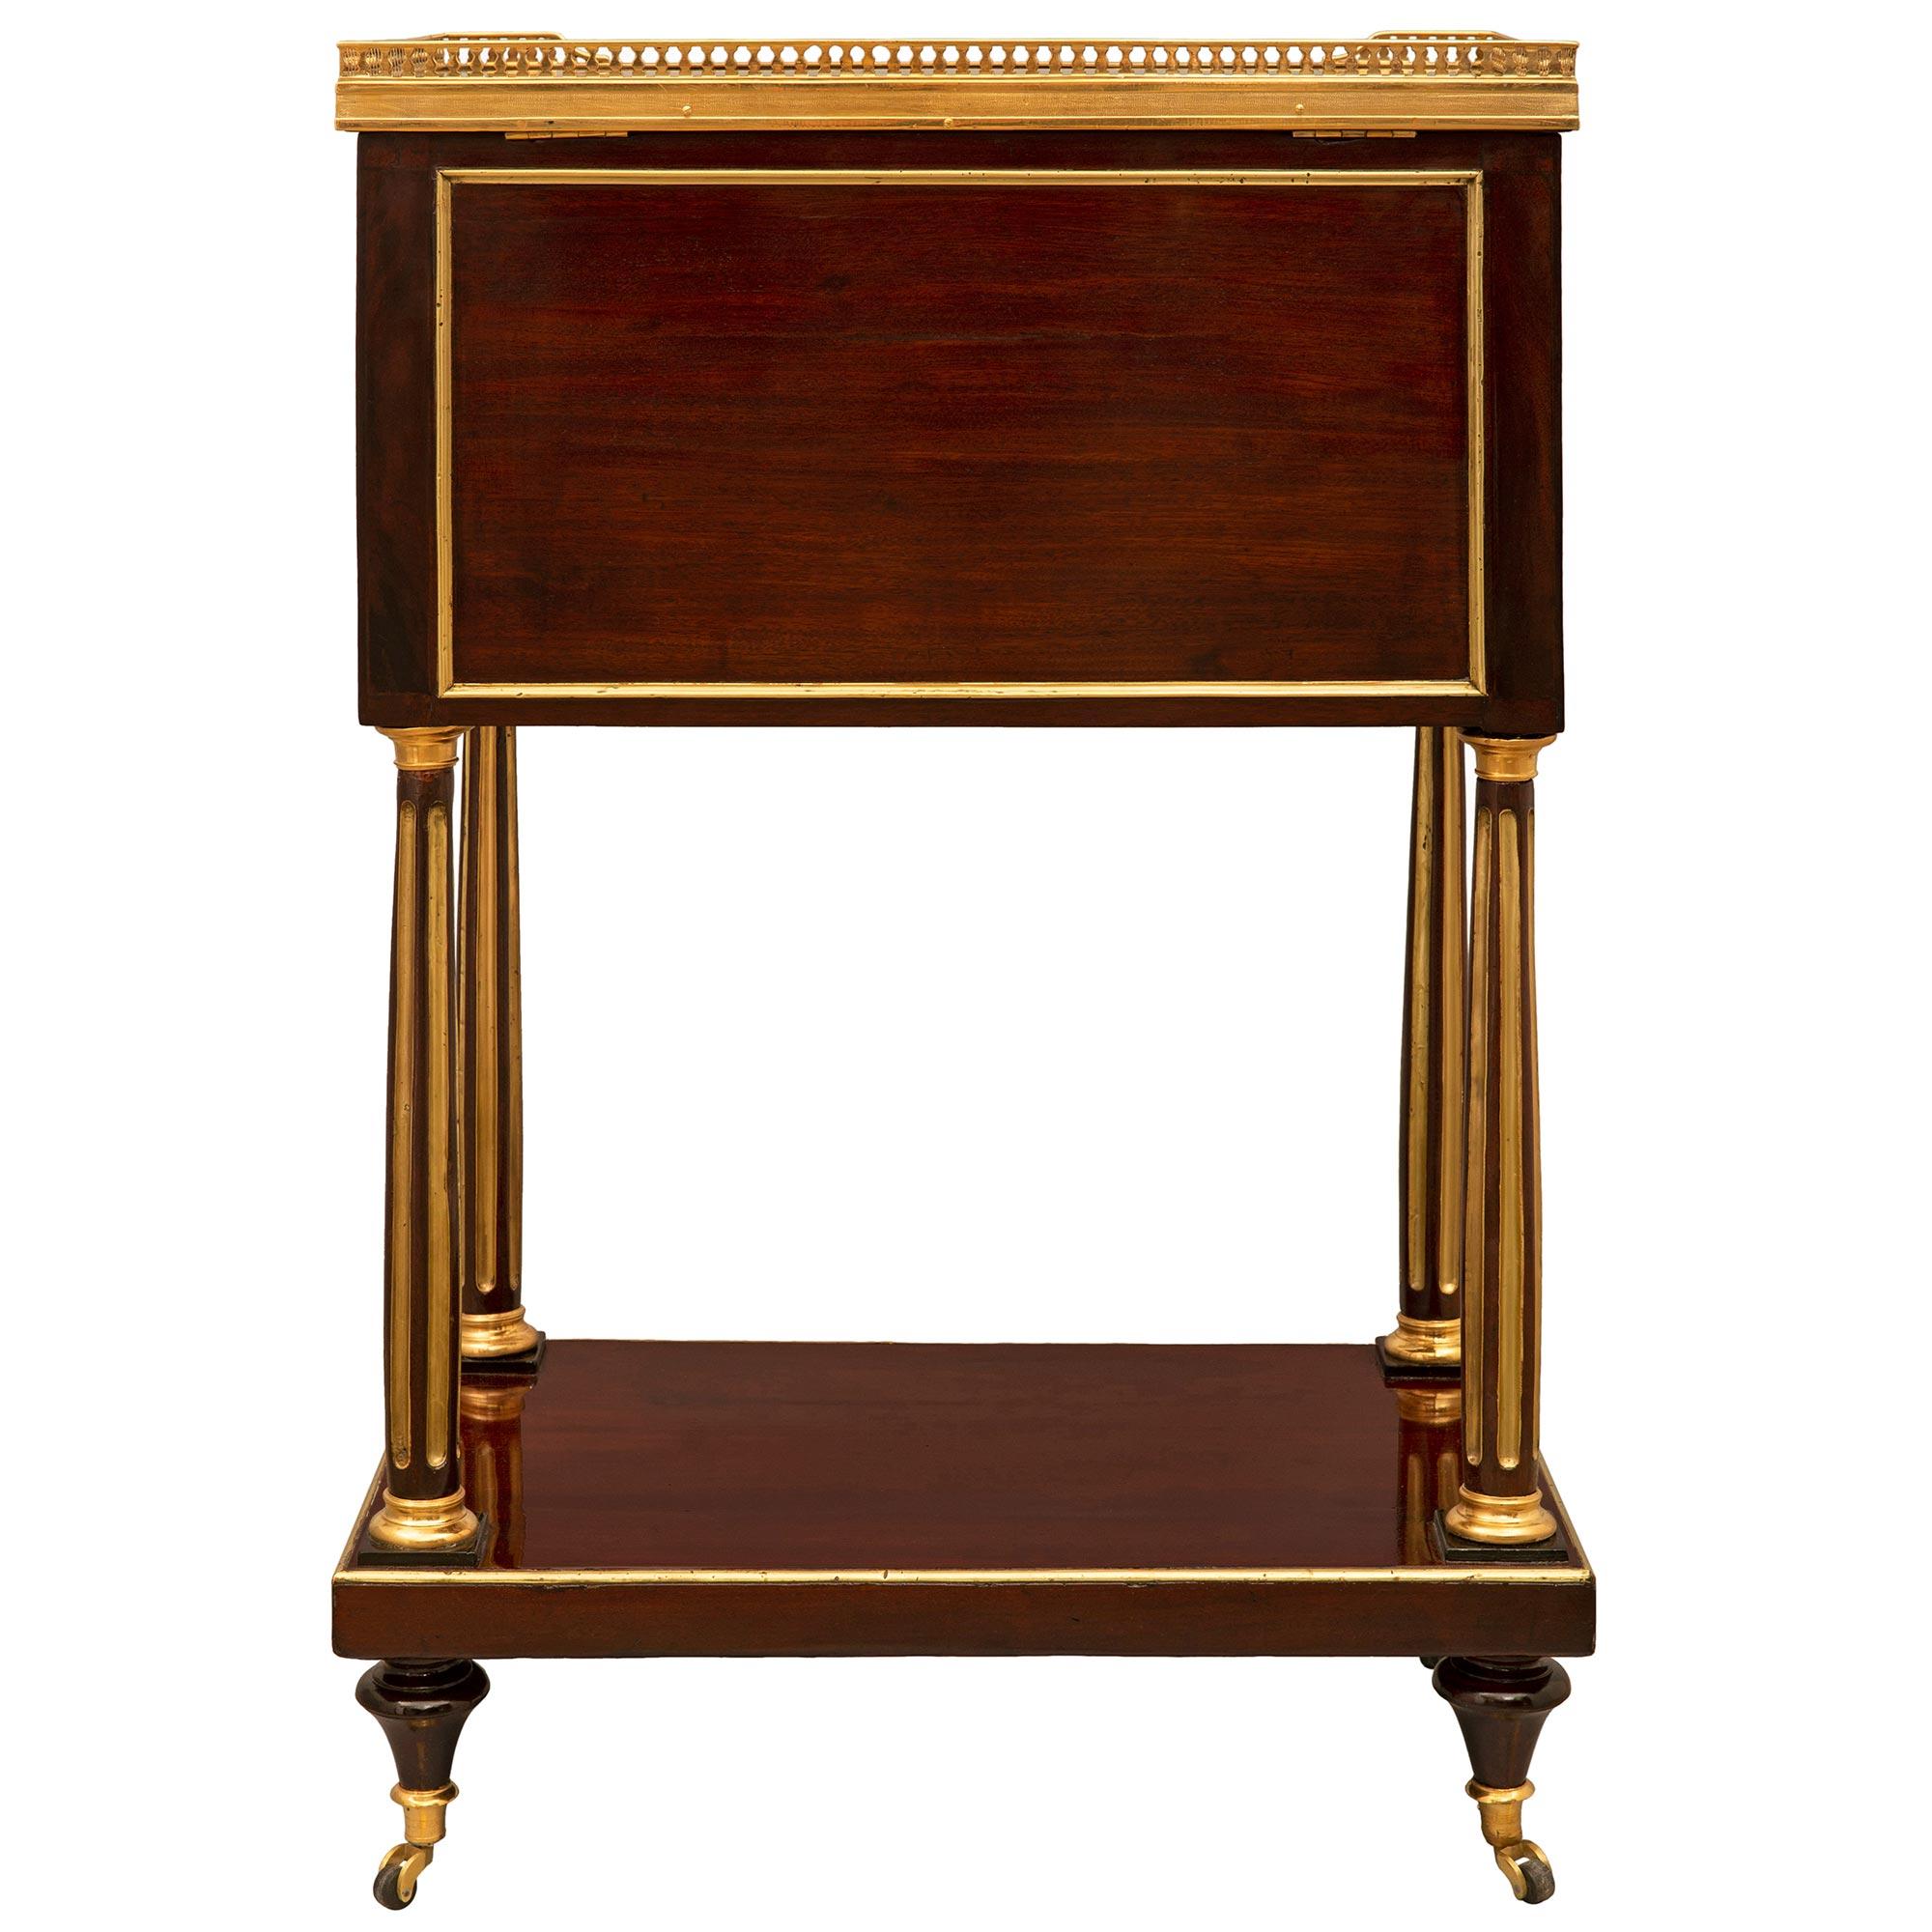 French 18th Century Louis XVI Period Mahogany and Ormolu Vanity/Side Table For Sale 1